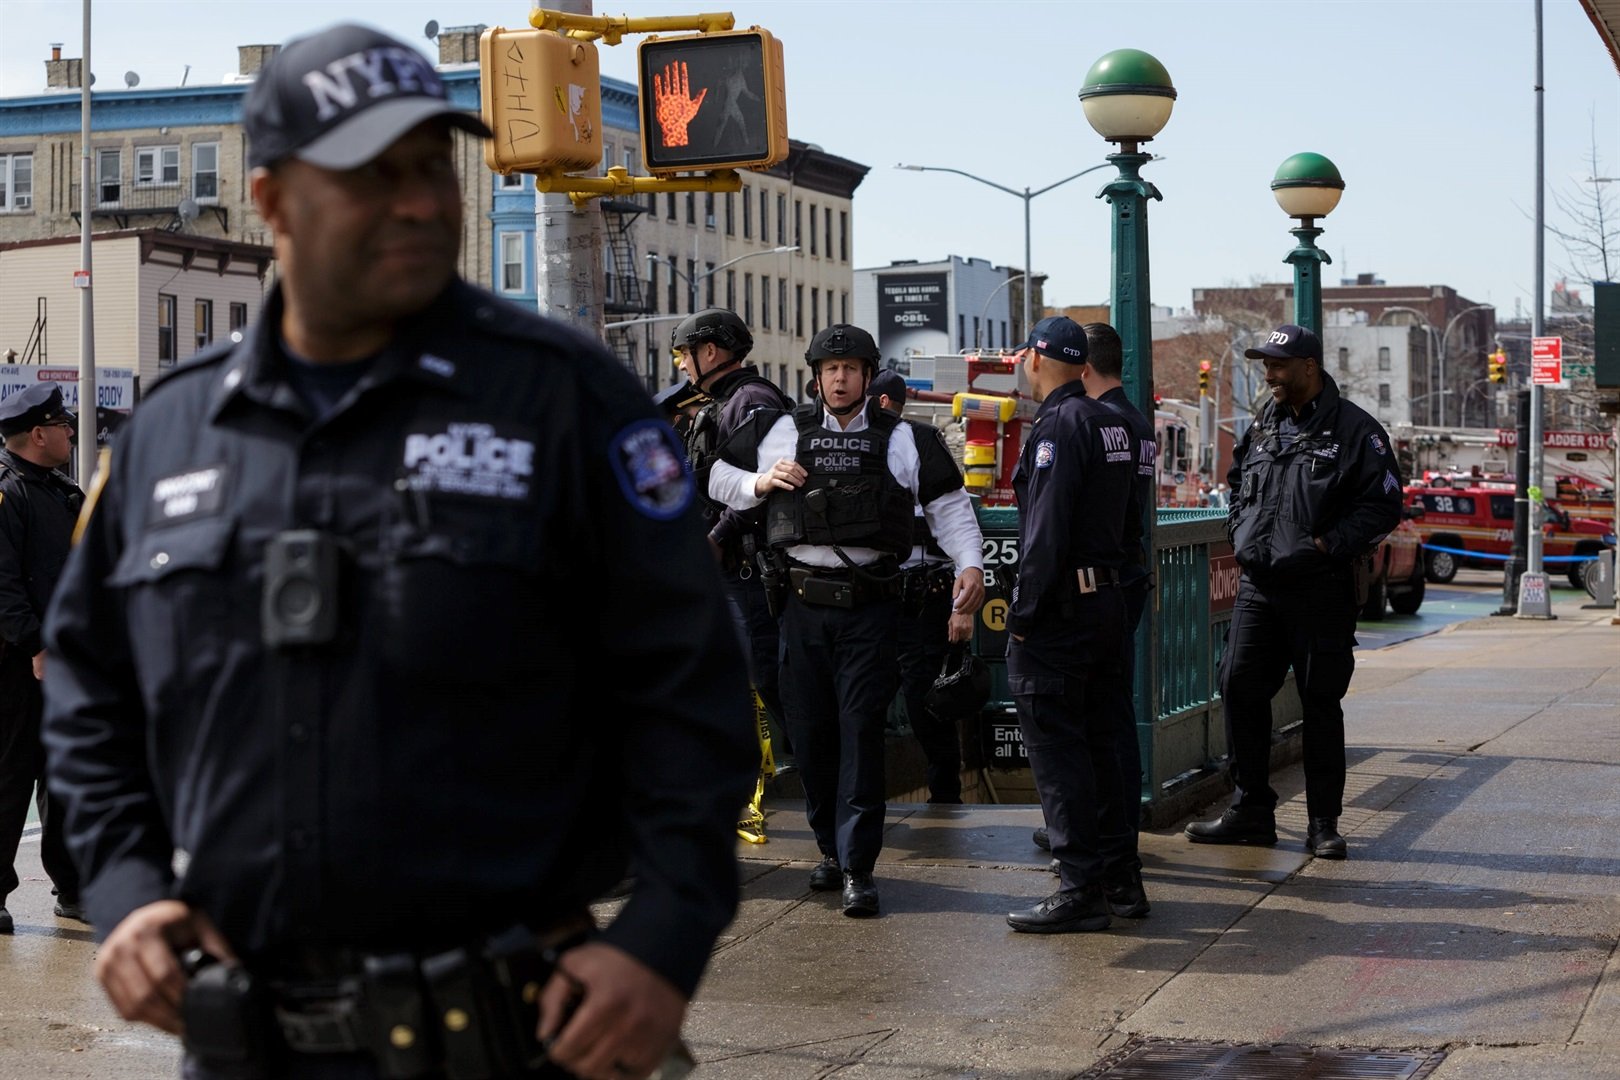 A police officer exits a subway station in New York city following a shooting on April 12, 2022. Anna Watts for Insider